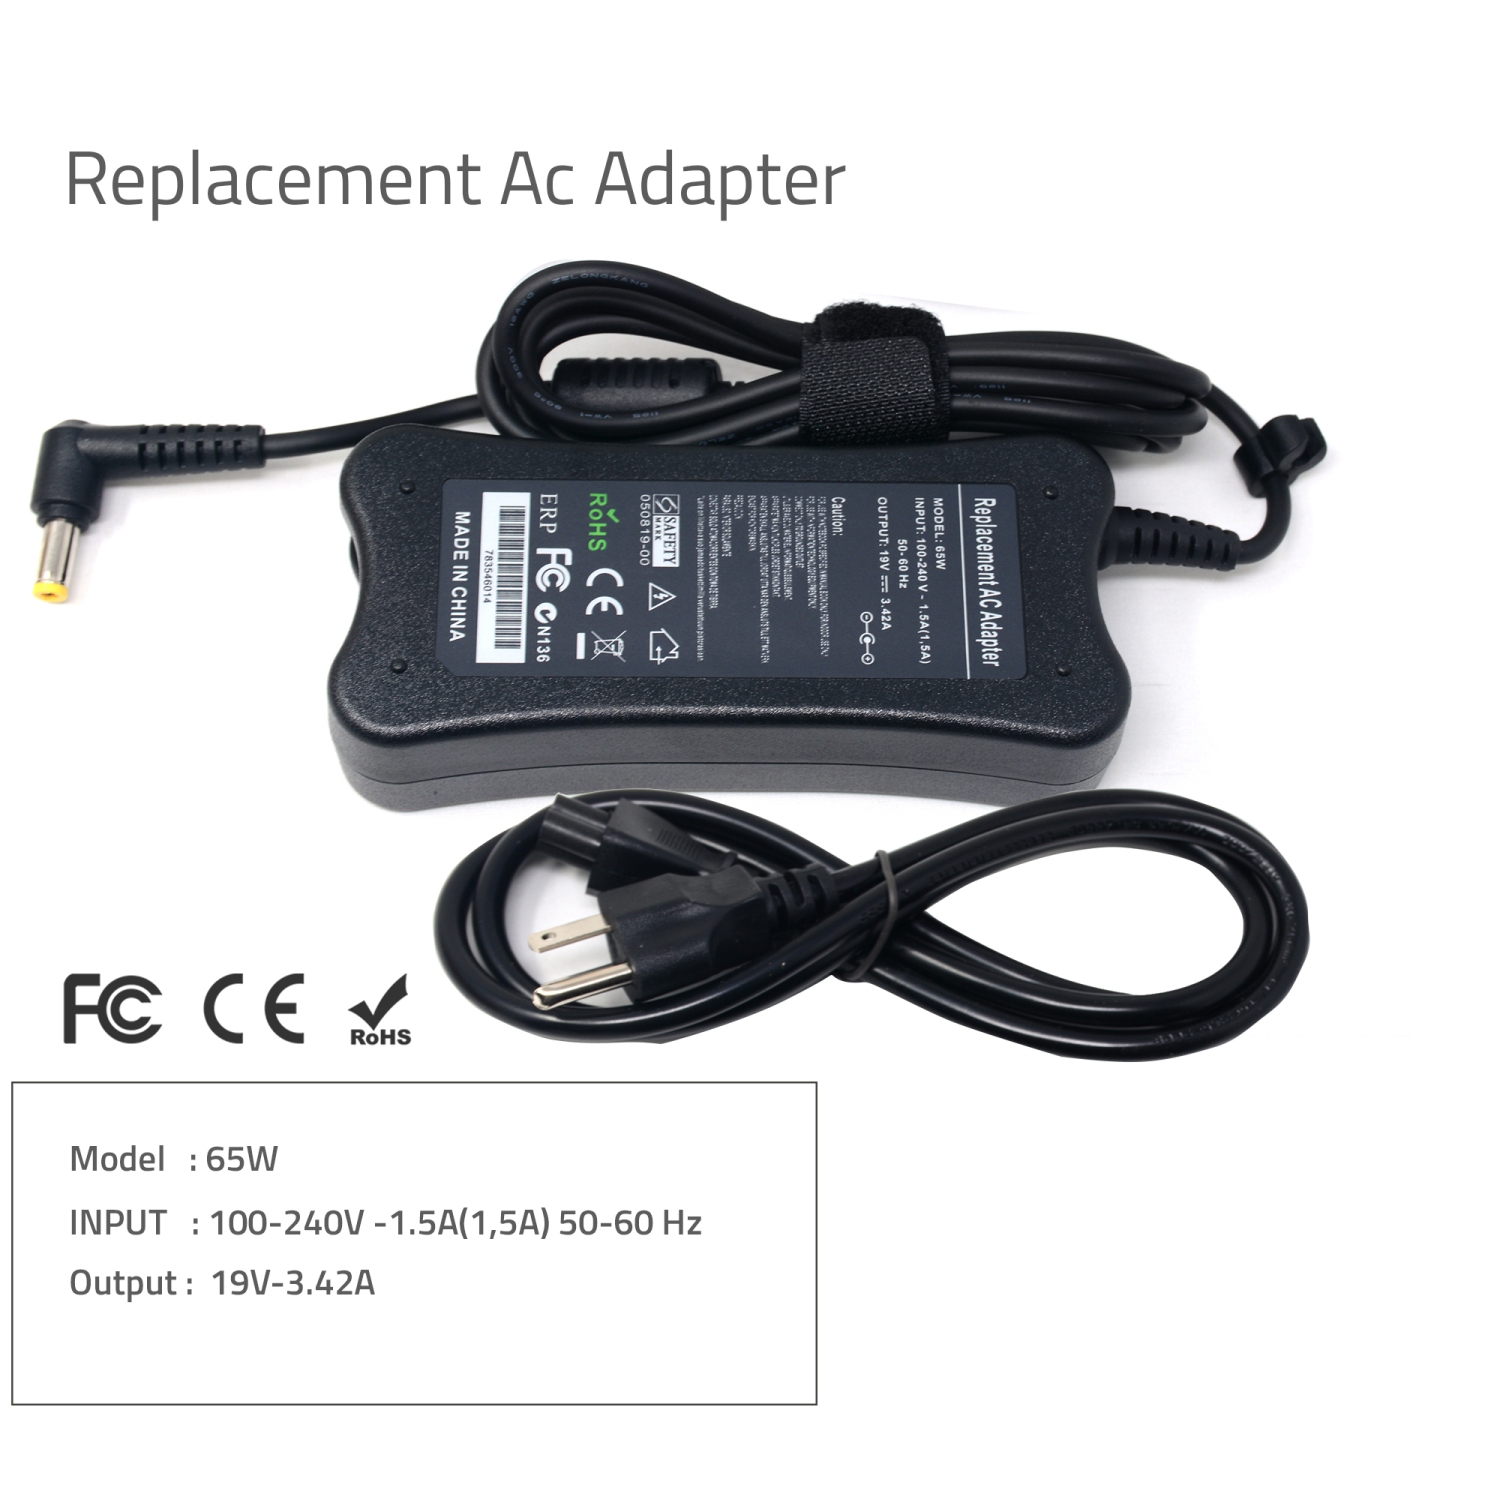 NEW 65W AC adapter charger for LENOVO 19V 3.42A Laptop Power Adapter Compatible with Lenovo IdeaPad 330 330S 320 320S ADL45WCC, Yoga 710 510 520 530